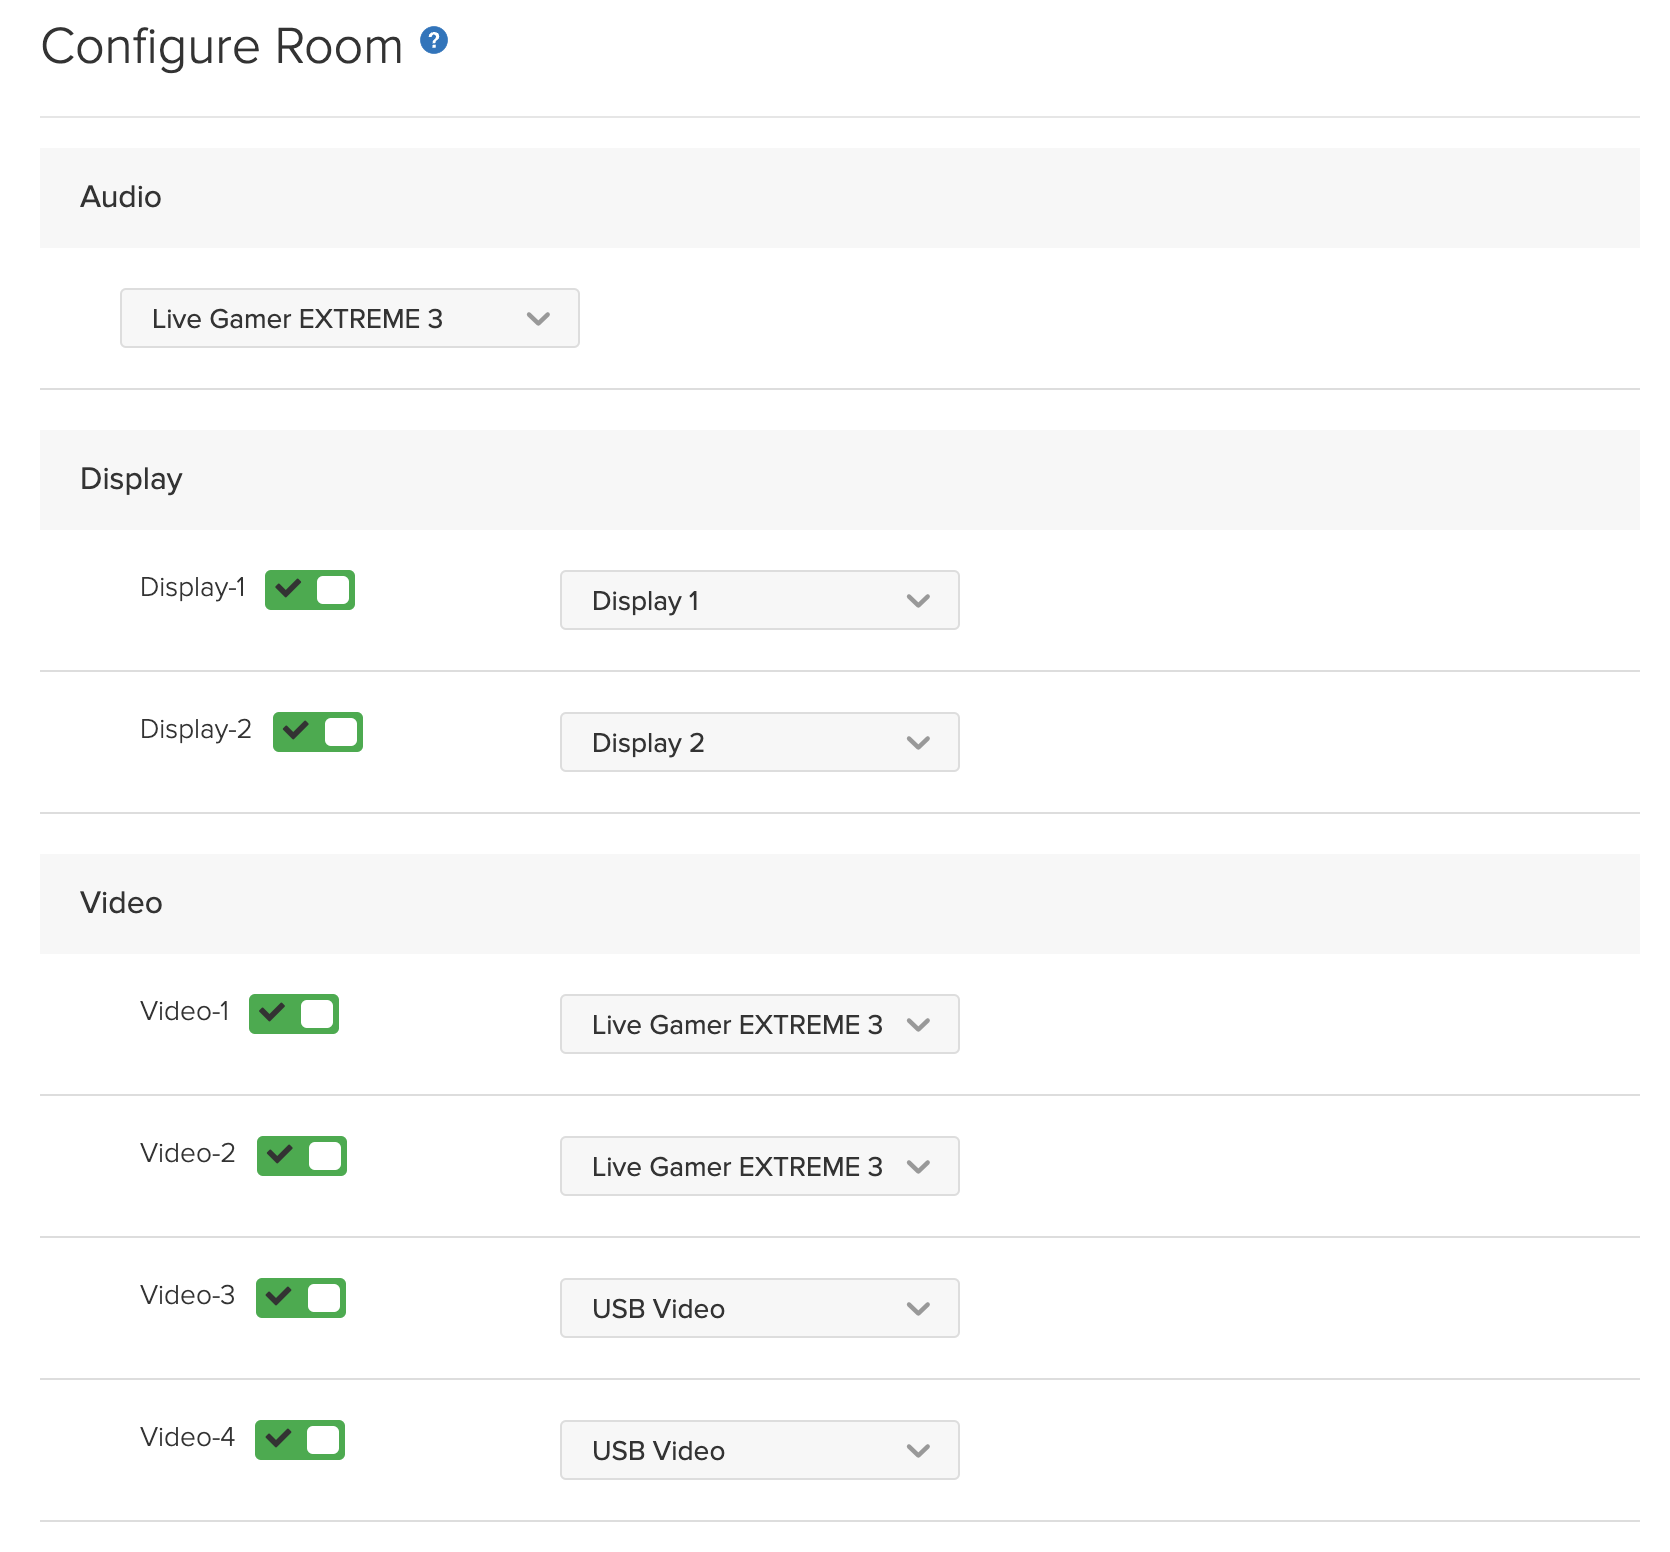 Room Configuration page with 2 Displays and 4 Video options as described